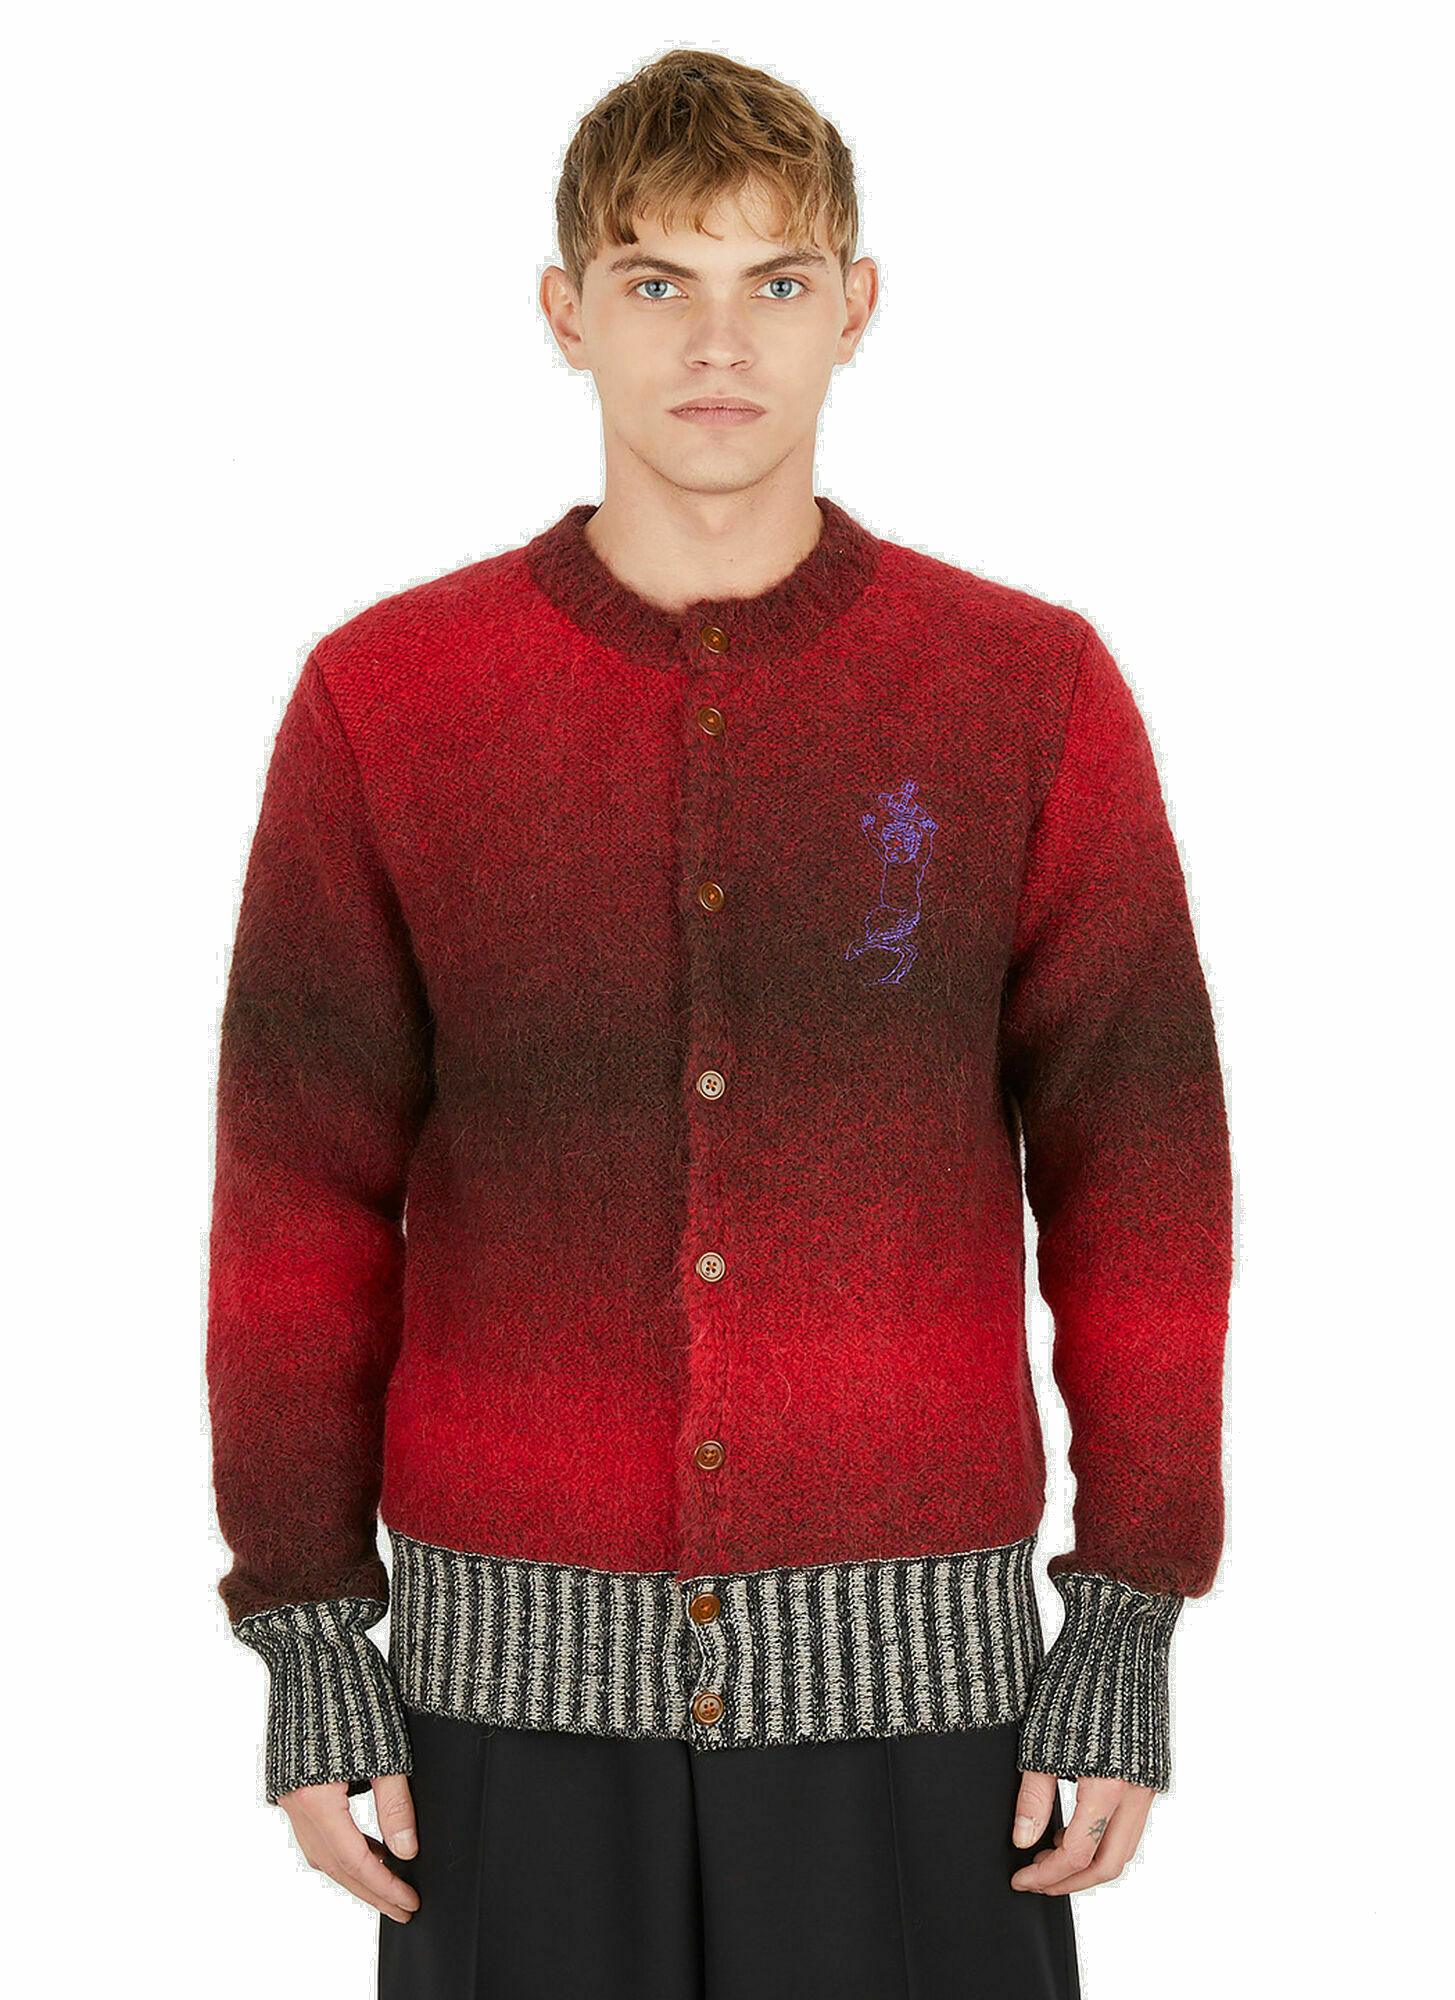 Ombre Cardigan in Red Vivienne Westwood